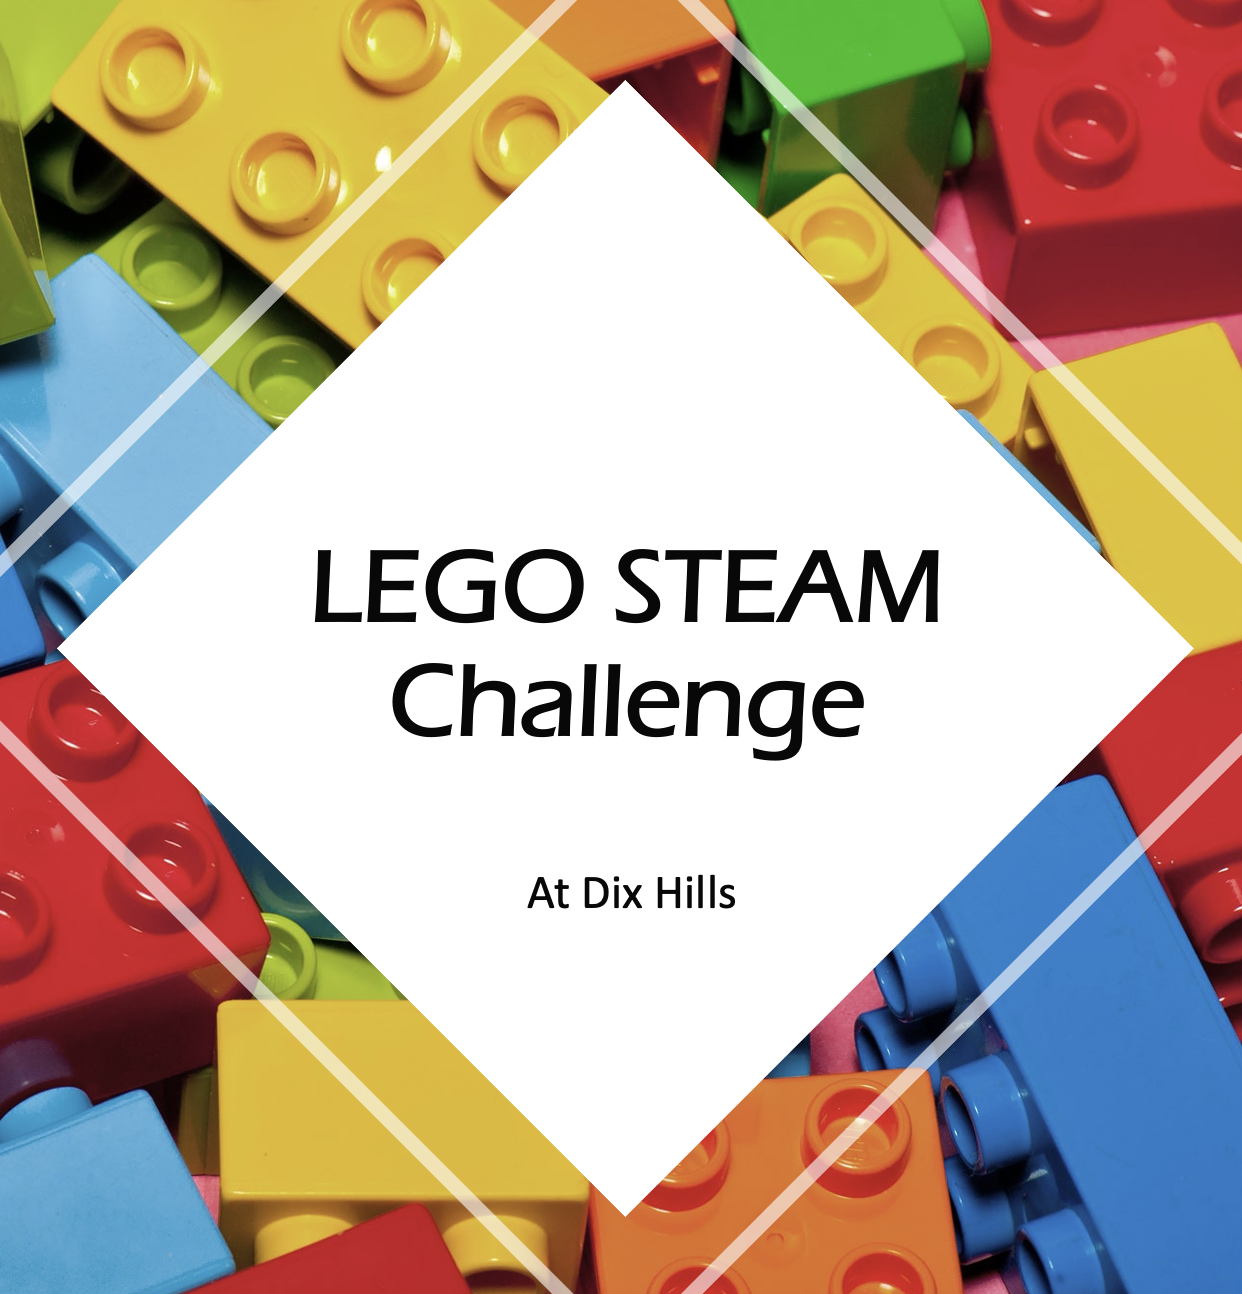 Image of multicolored legos as a background with a white diamond overlaying it containing bold black words reading "LEGO STEAM Challenge at Dix Hills"